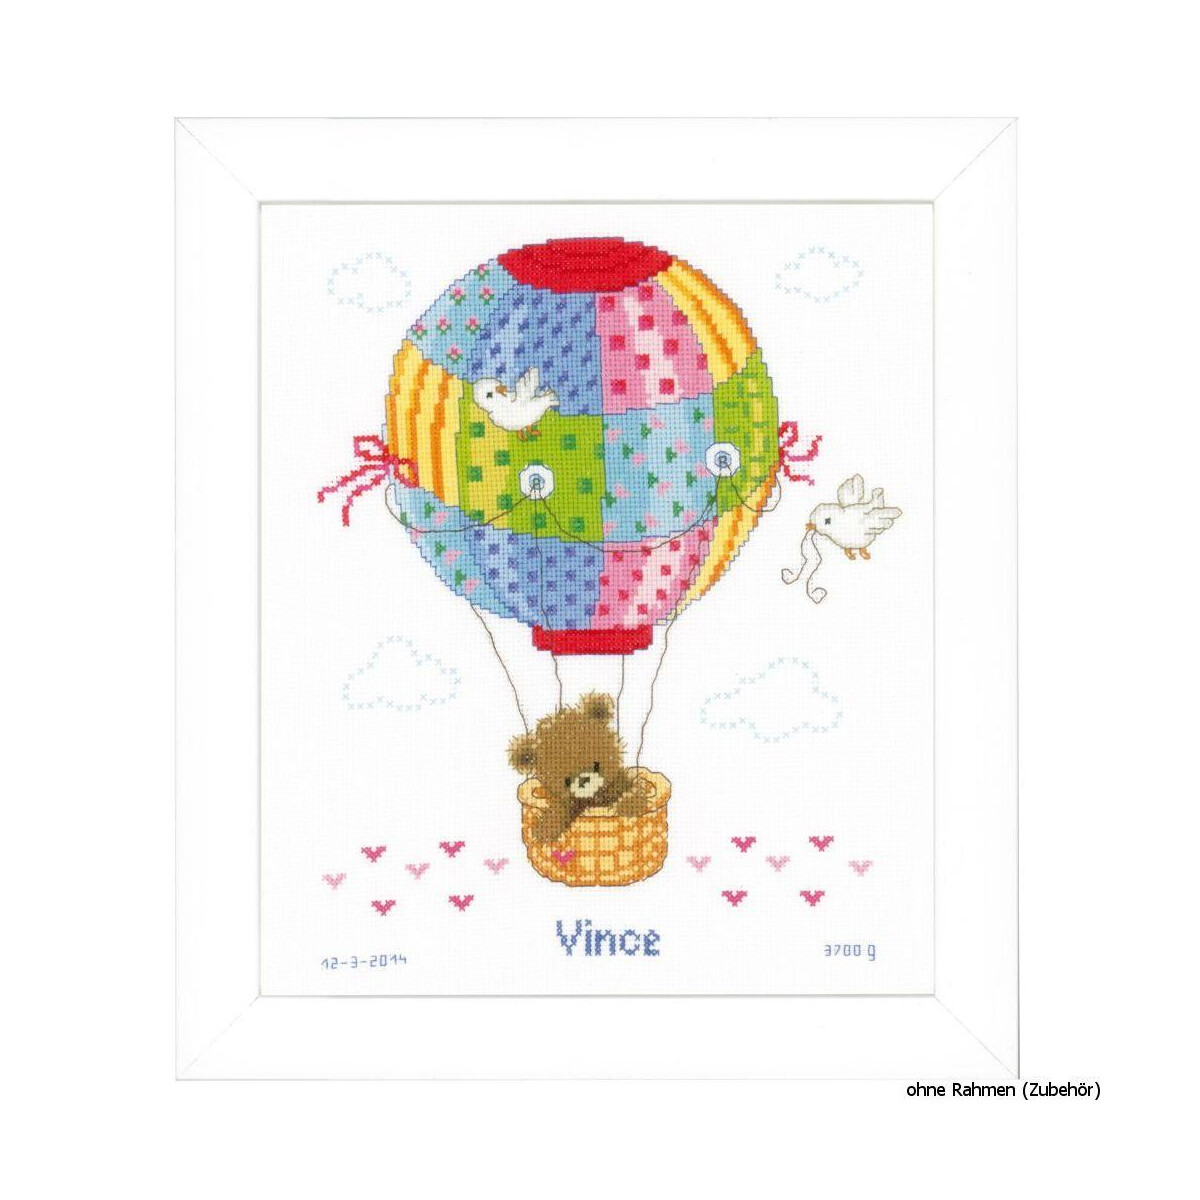 Vervaco Counted cross stitch kit Hot air balloon, DIY